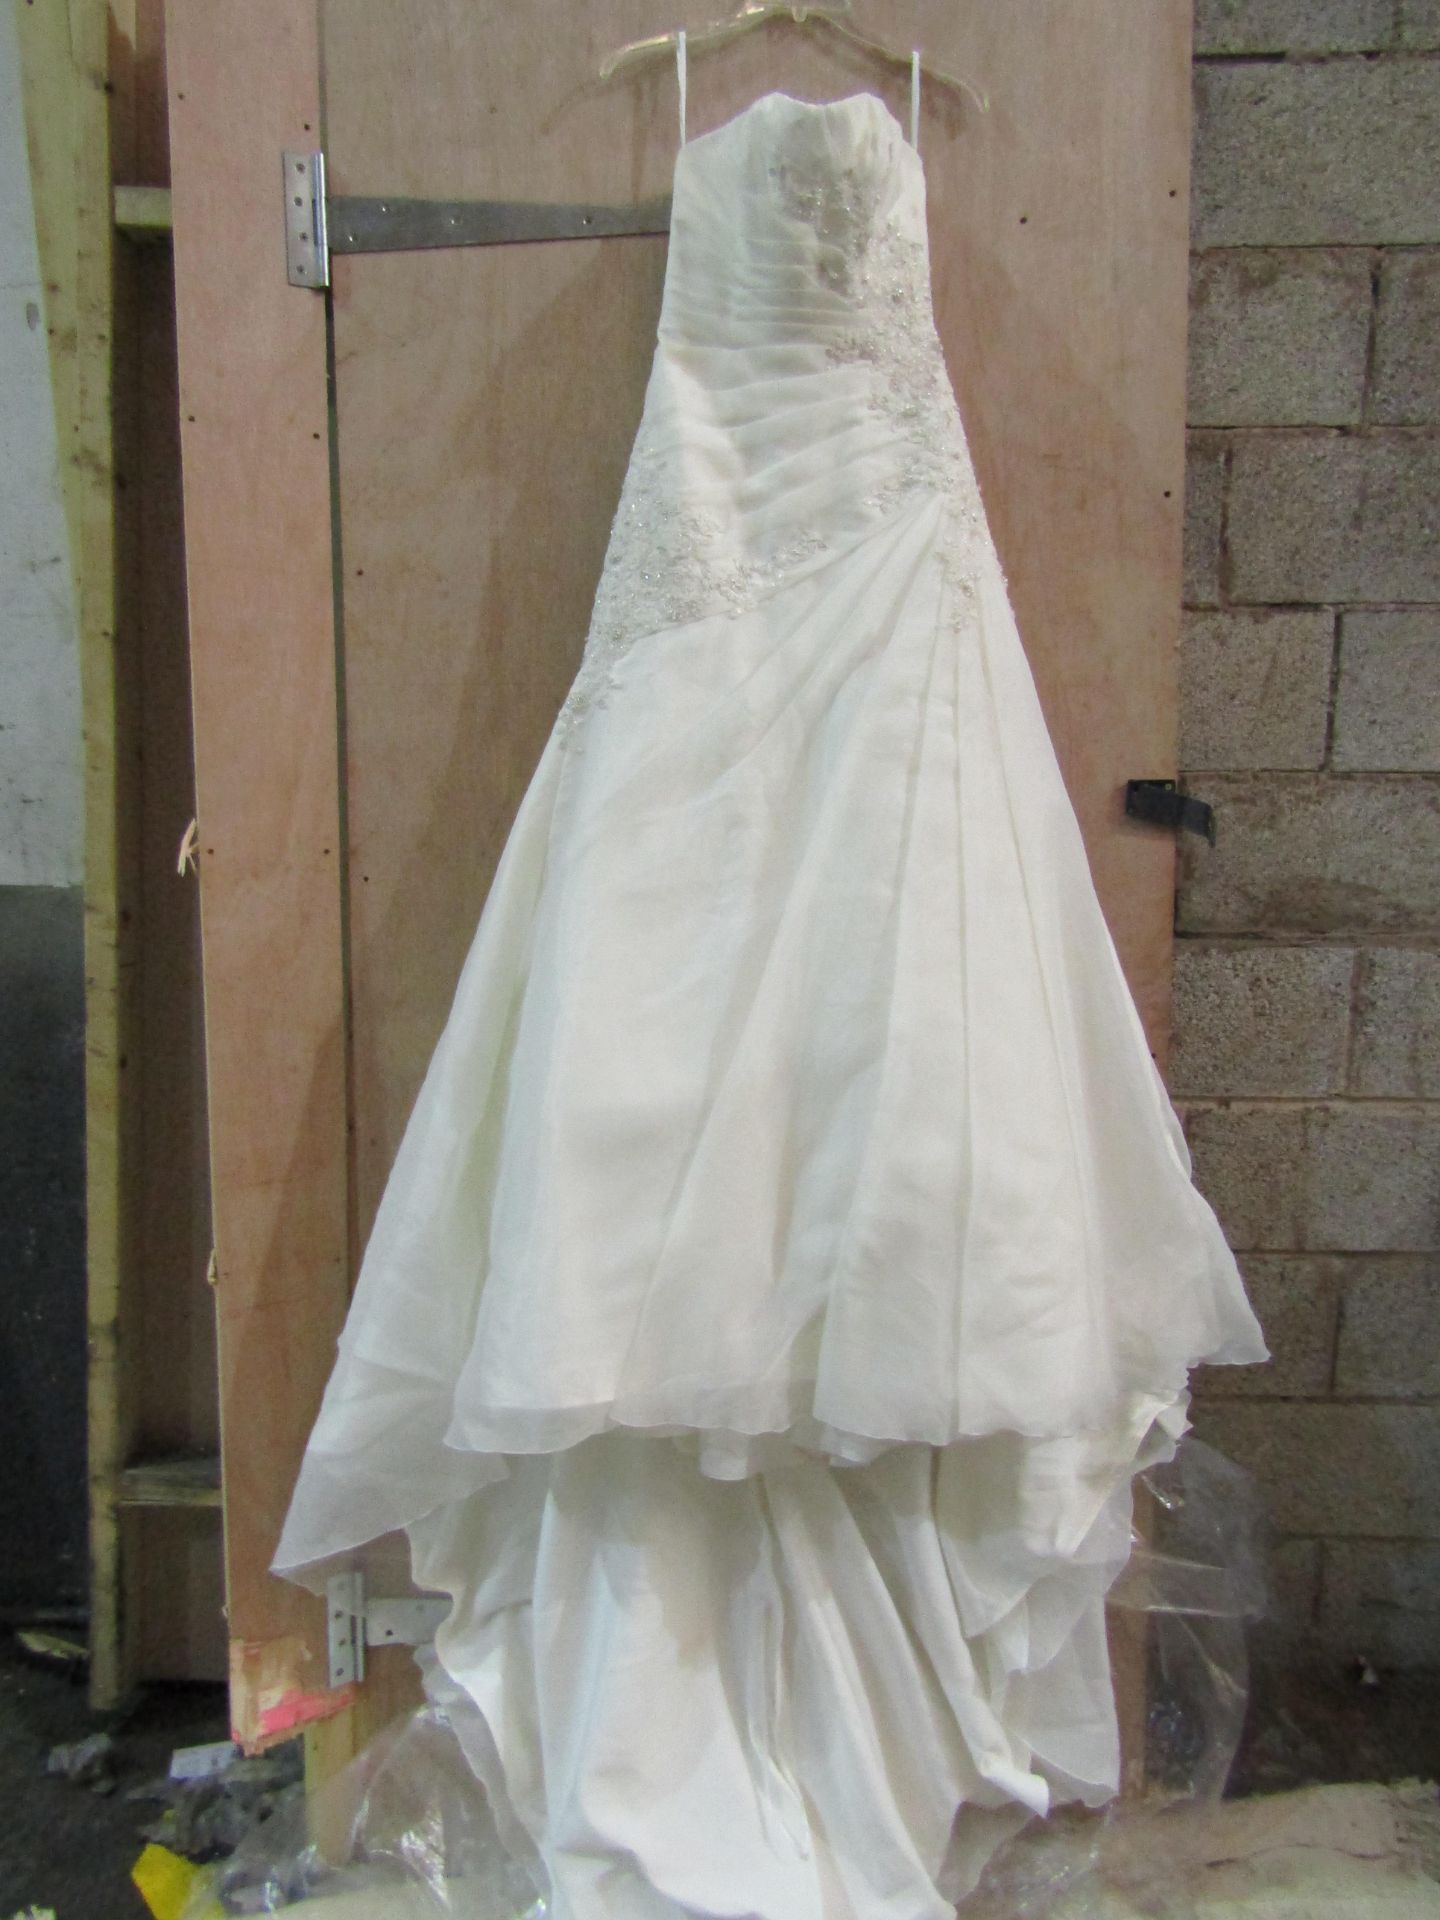 Approx 500 pieces of wedding shop stock to include wedding dresses, mother of the bride, dresses, - Image 59 of 71